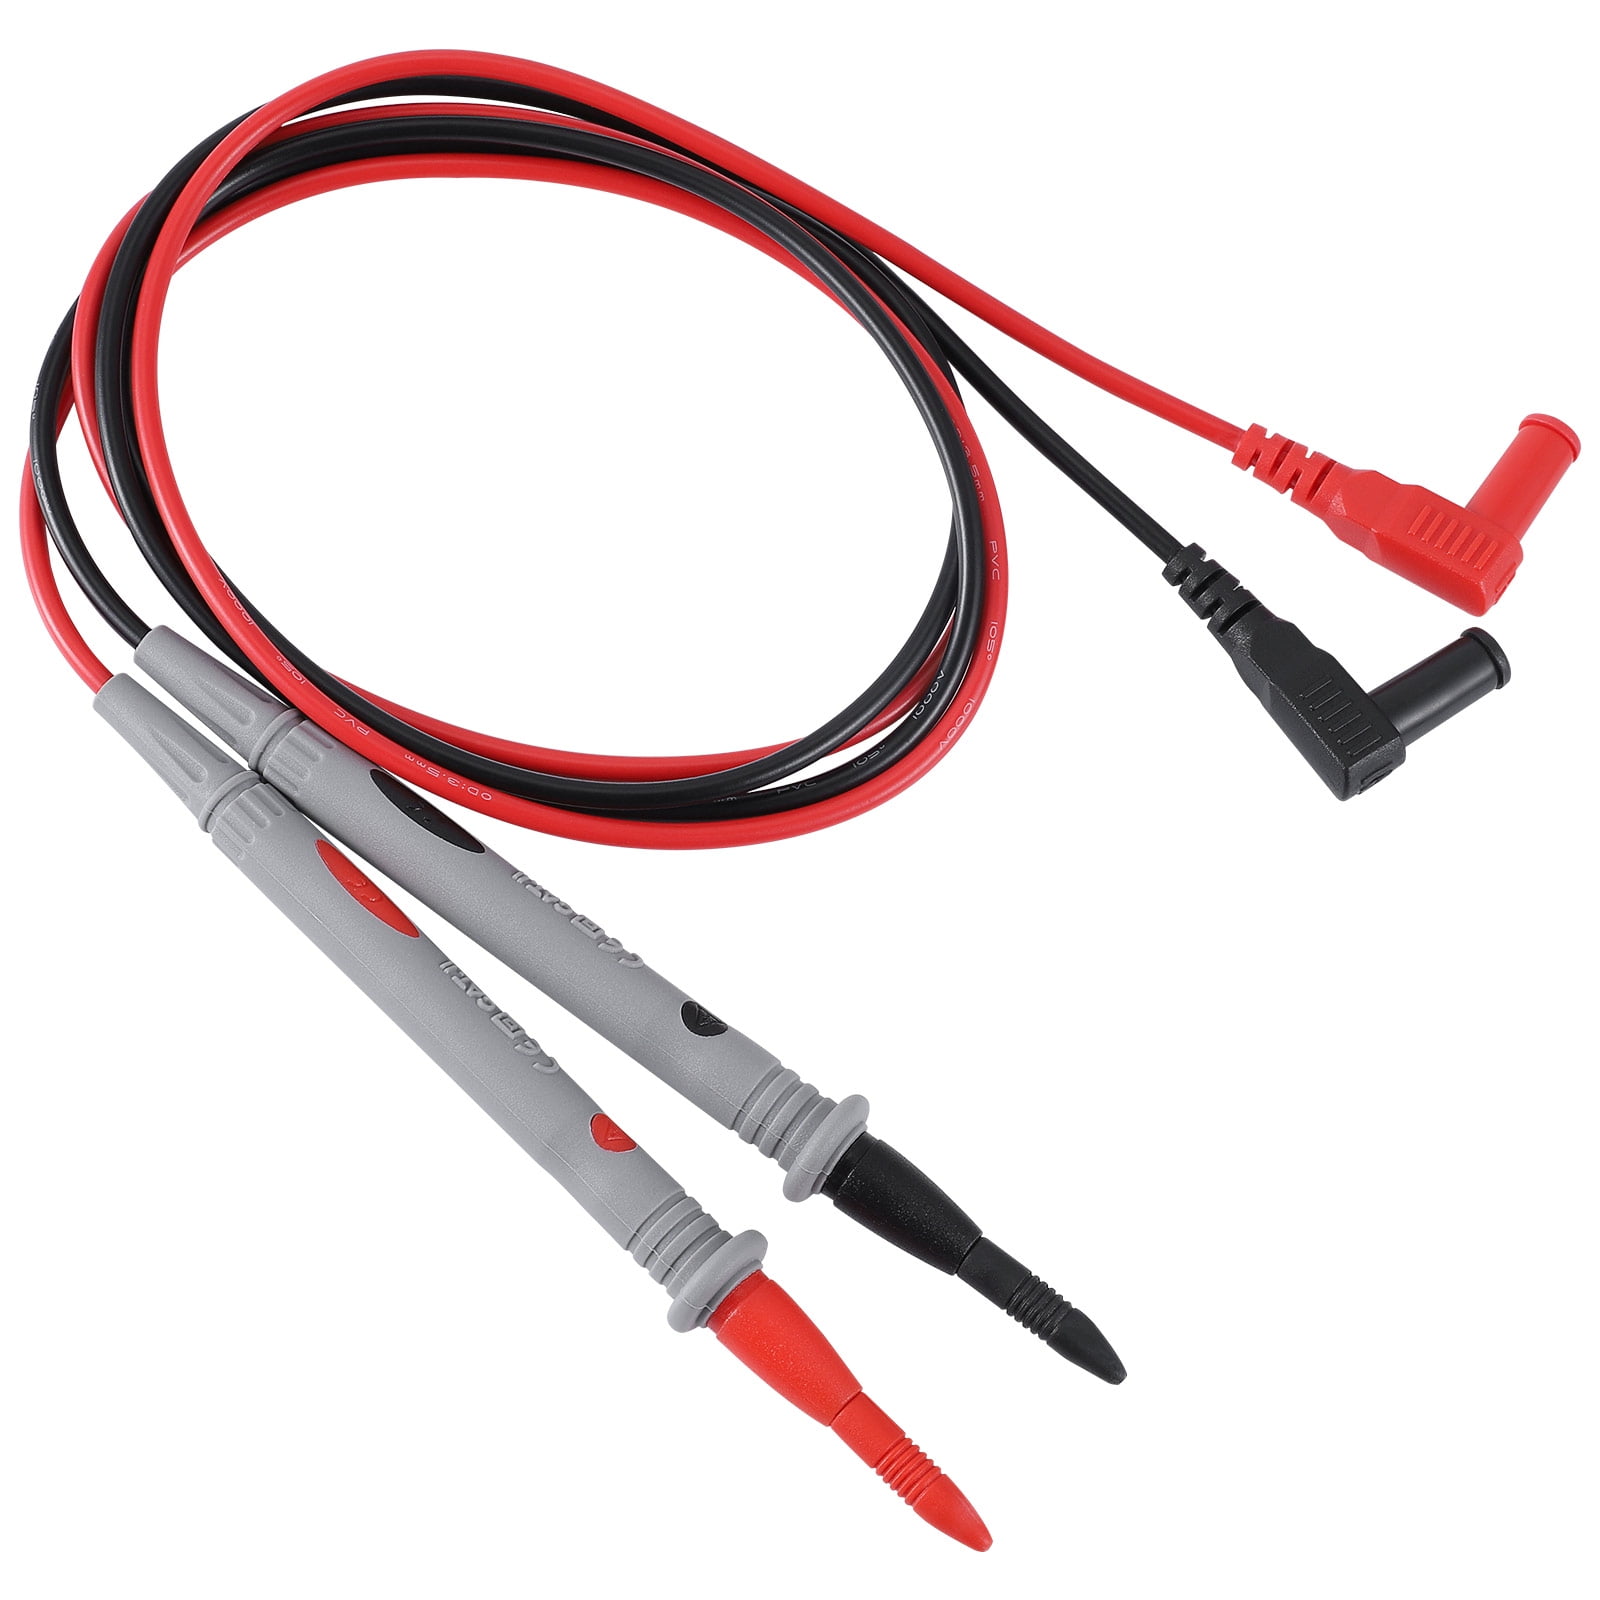 High Quality 1 PAIR Universal Probe Test Leads Pin For Digital Multimeter meter 